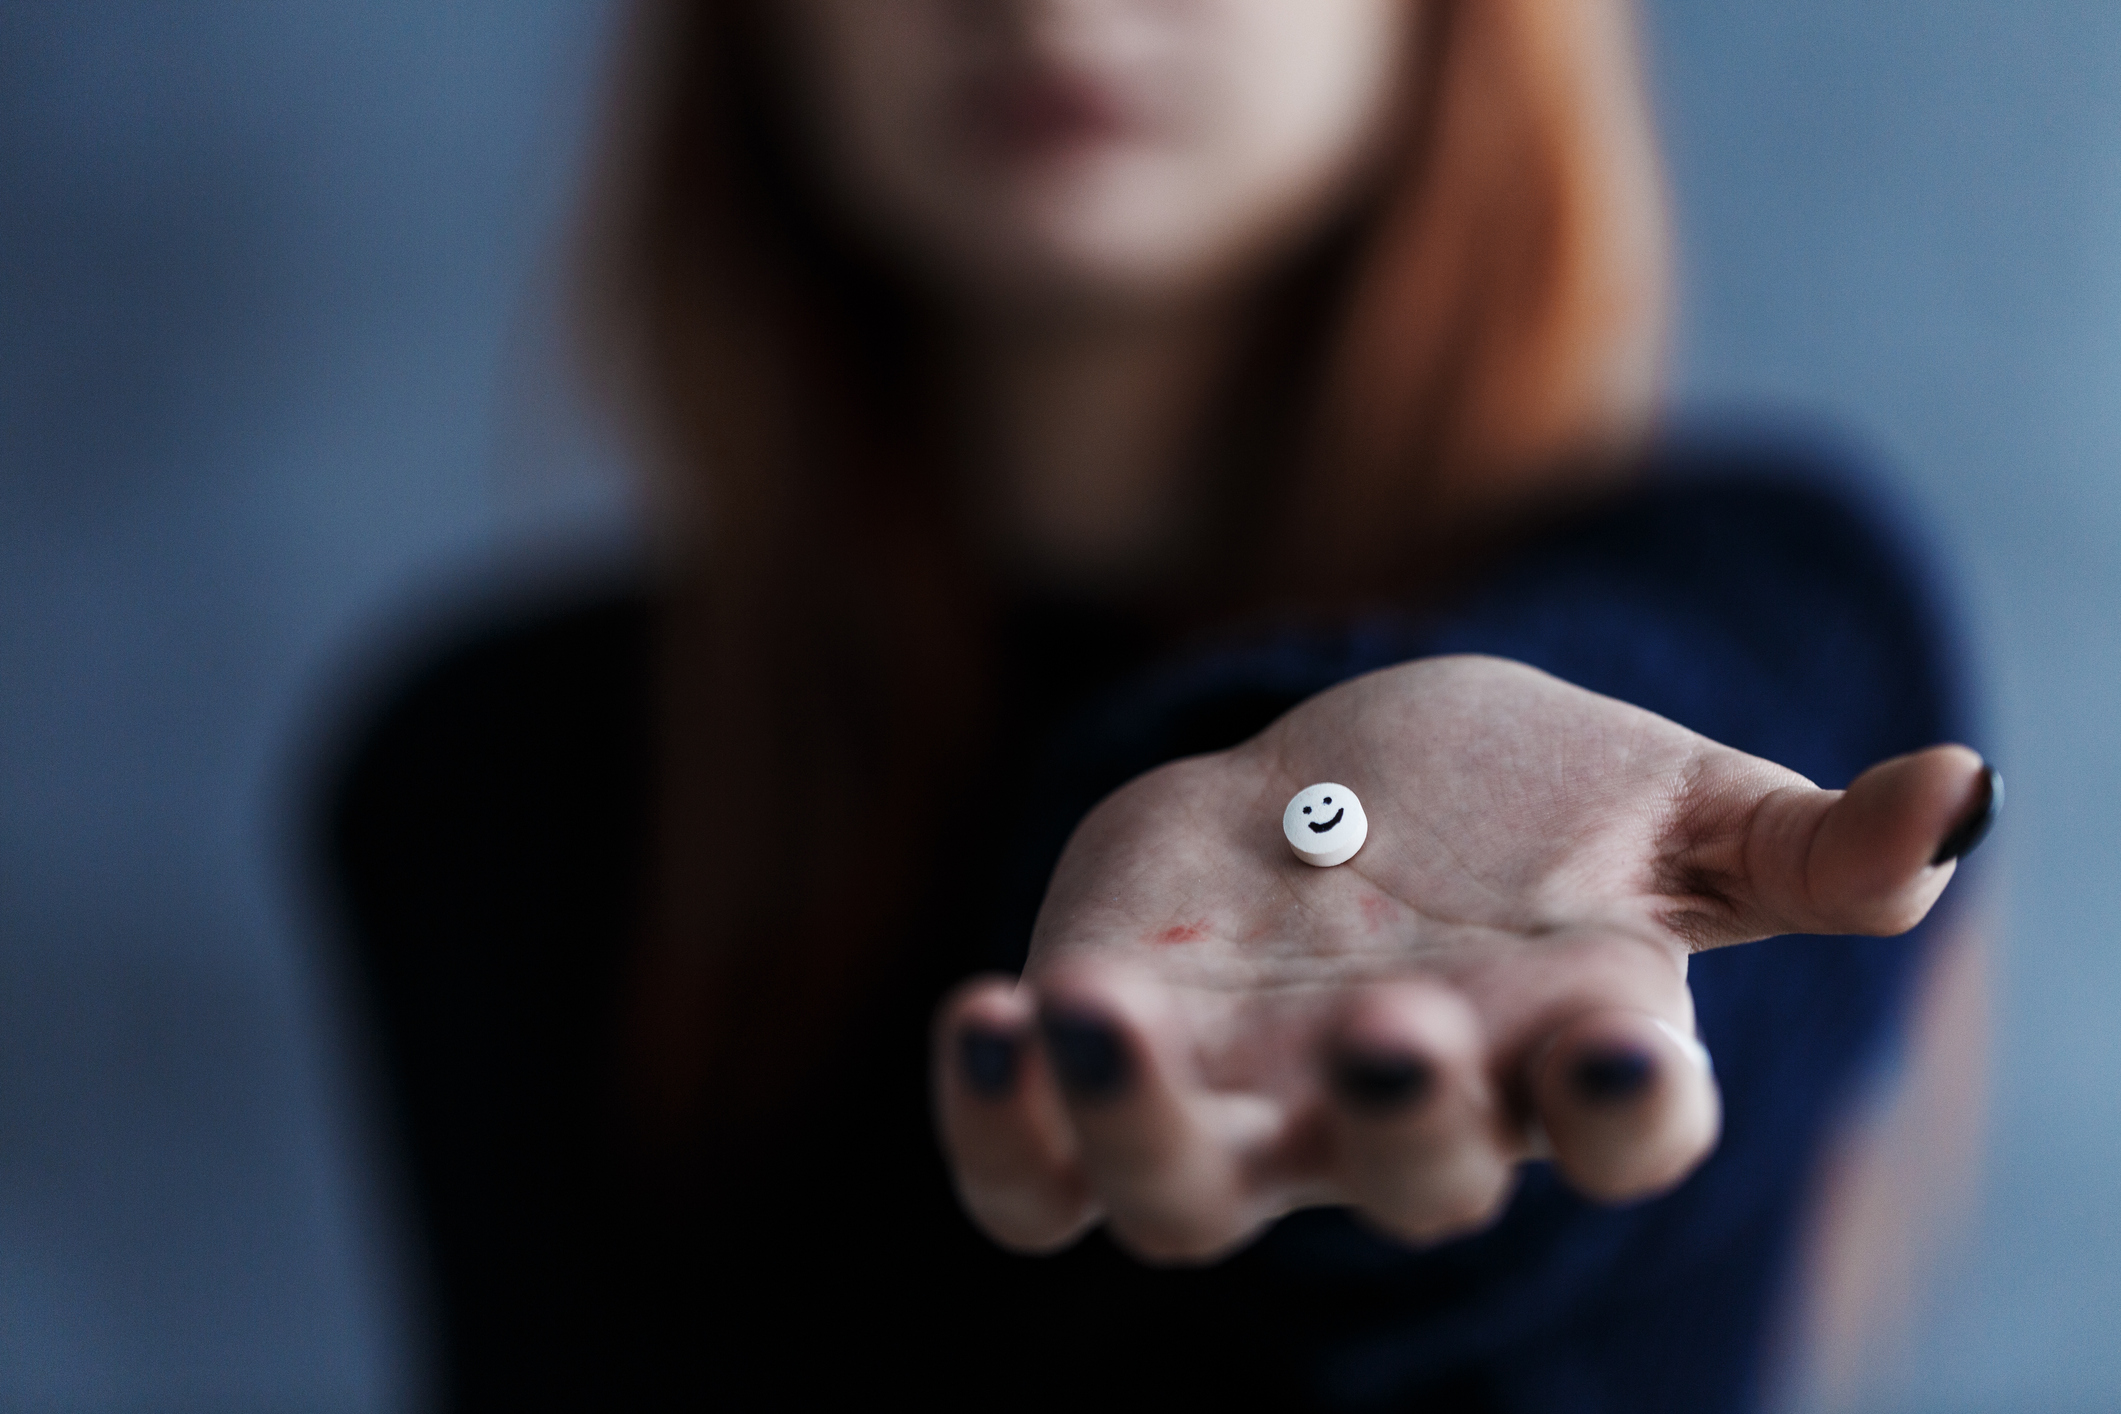 Close up of white pill with smiley face on a hand held by a young, ginger girl